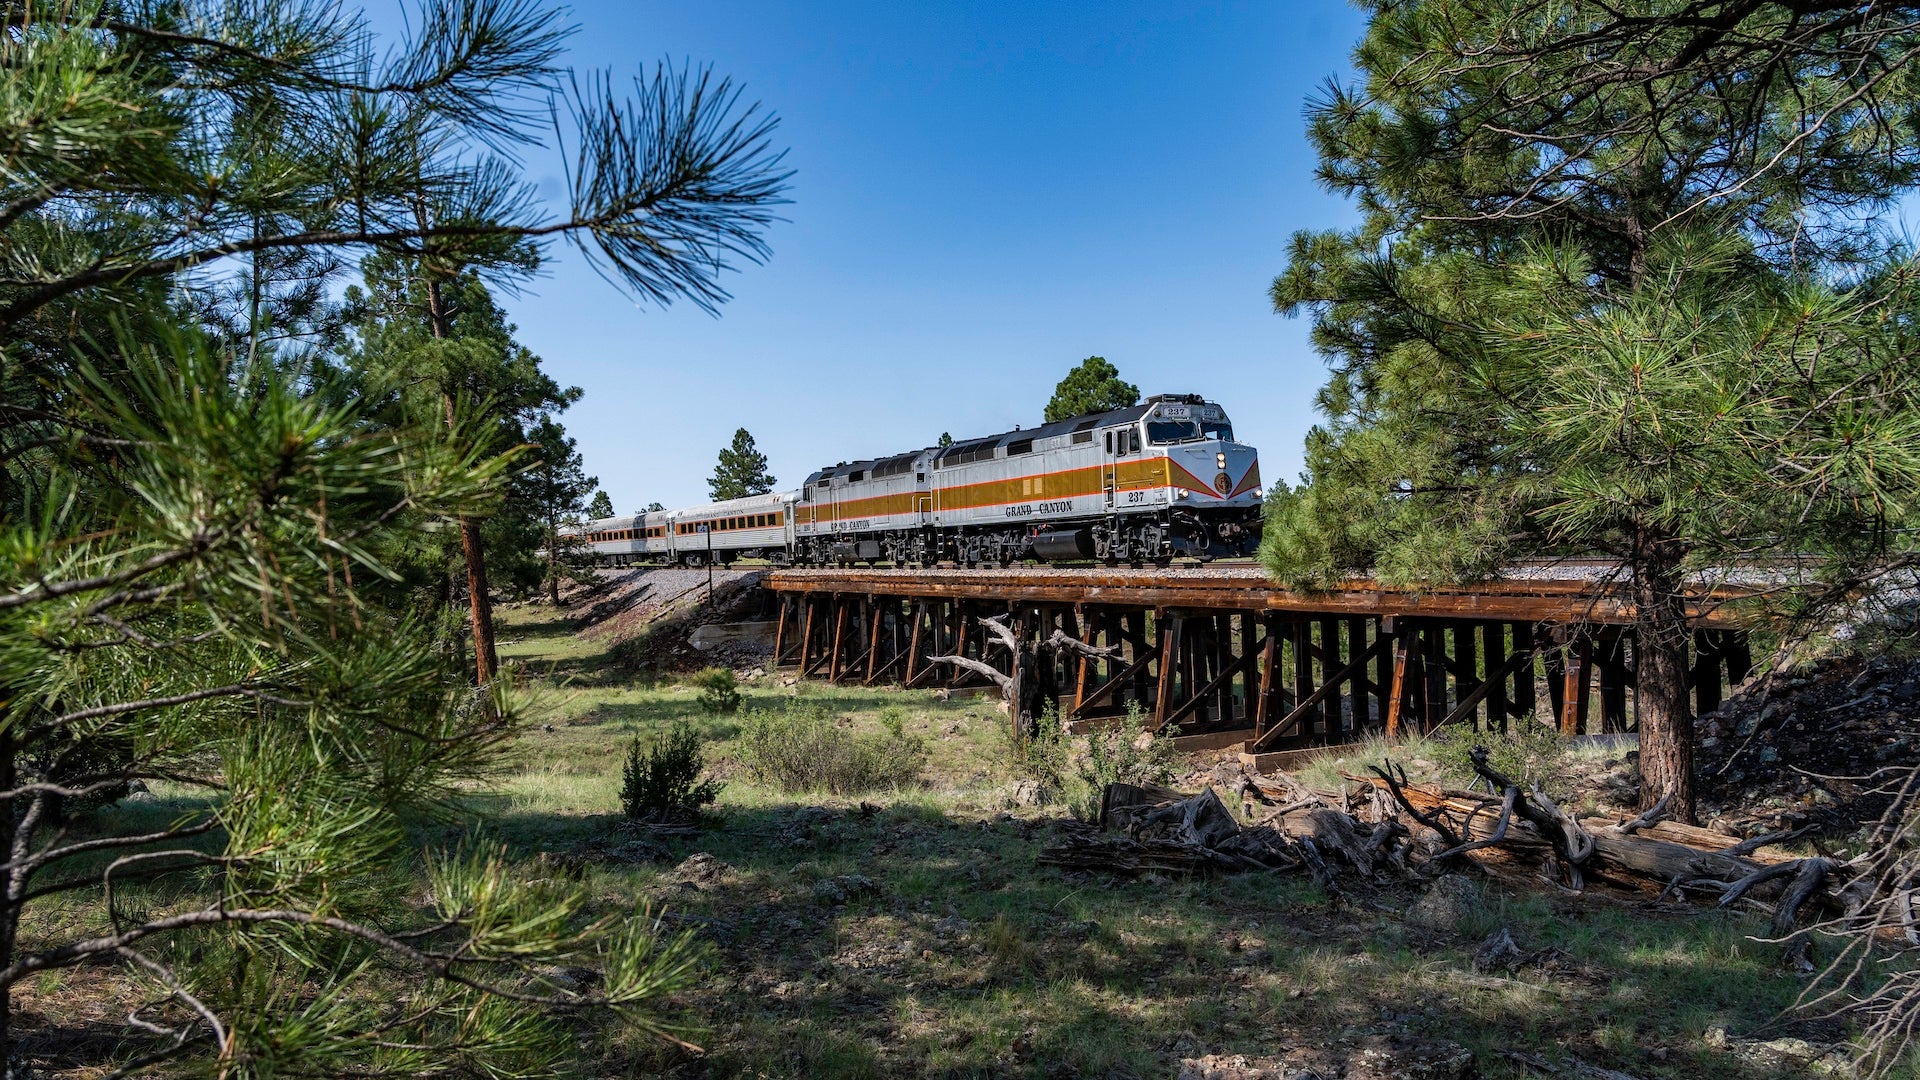 Exterior view of a train on raised tracks going through pine trees under a blue sky